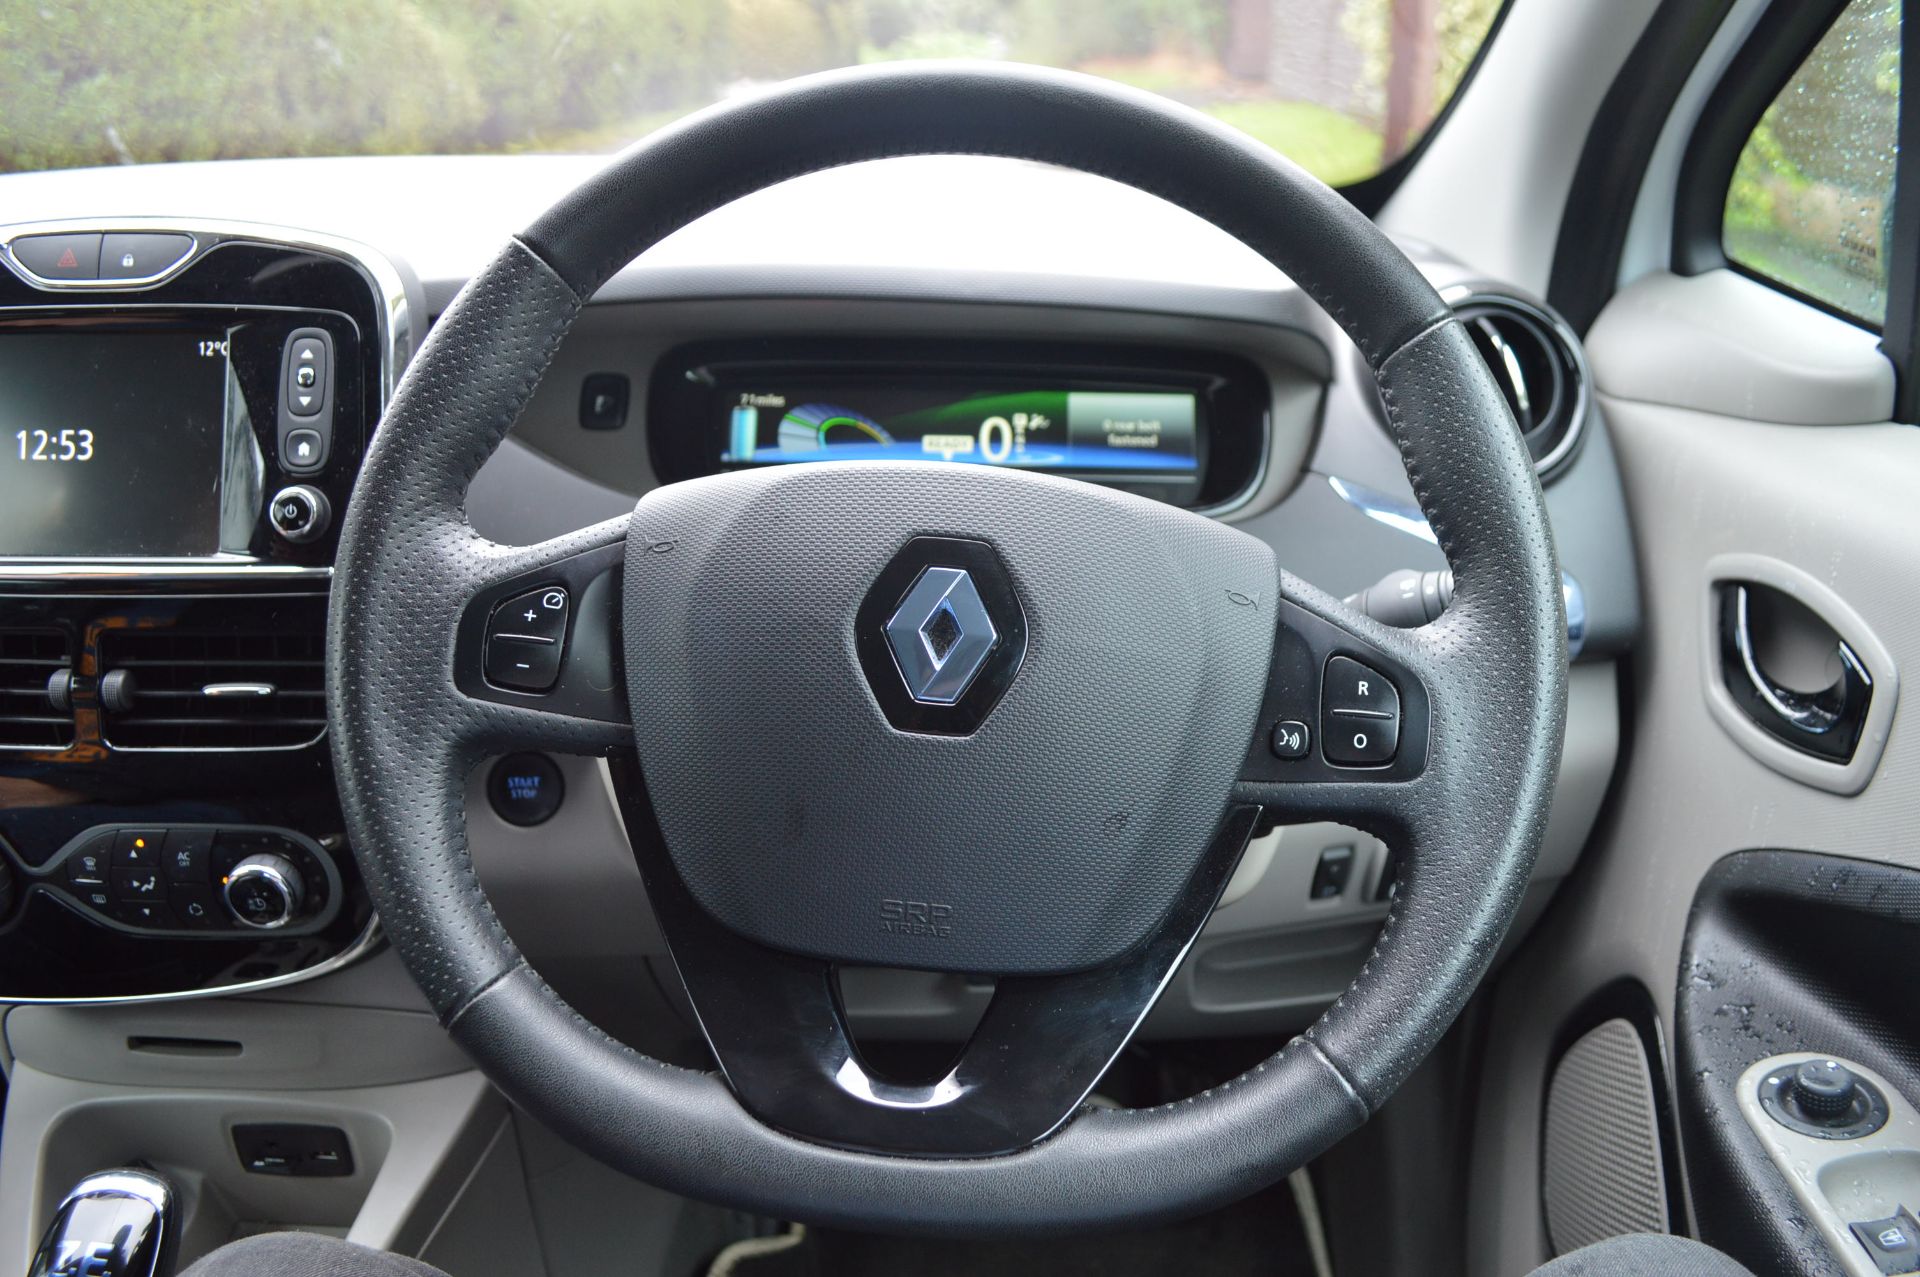 2015/15 REG RENAULT ZOE I-DYNAMIQUE INTENSE AUTOMATIC 5DR WITH SAT NAV - ELECTRIC, SHOWING 1 KEEPER - Image 15 of 20